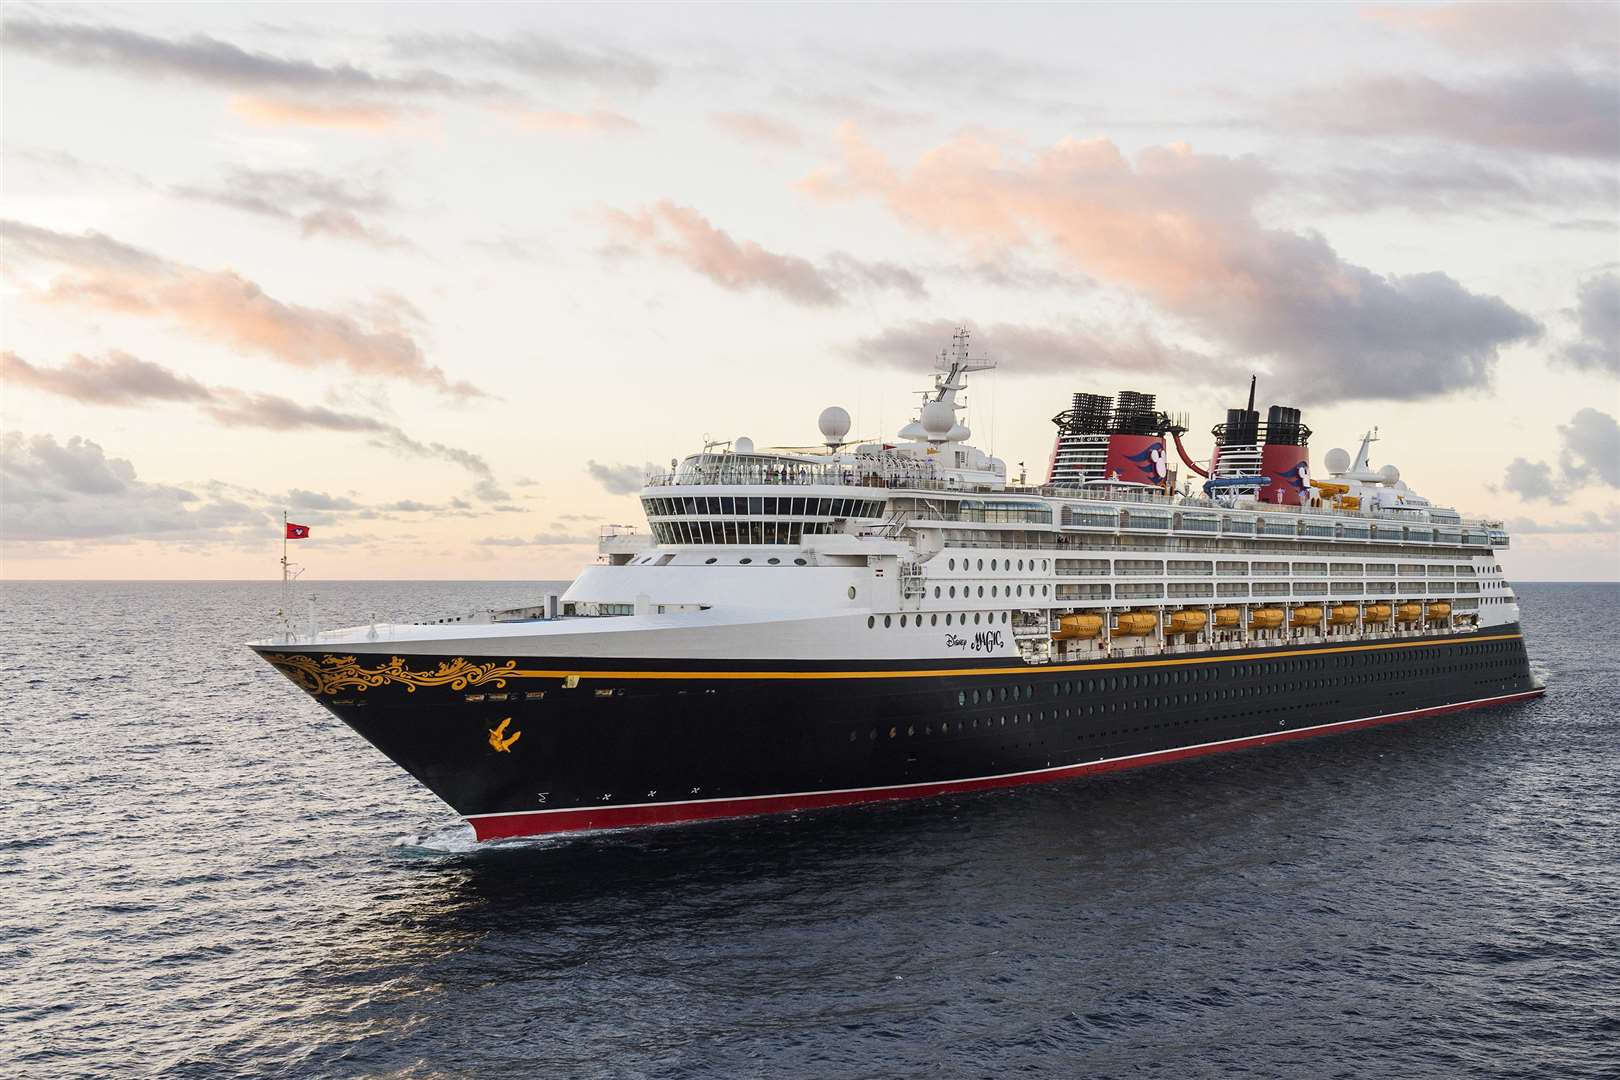 Adults wishing to board the Disney Magic for a UK holiday this summer must be 'fully vaccinated' says Disney